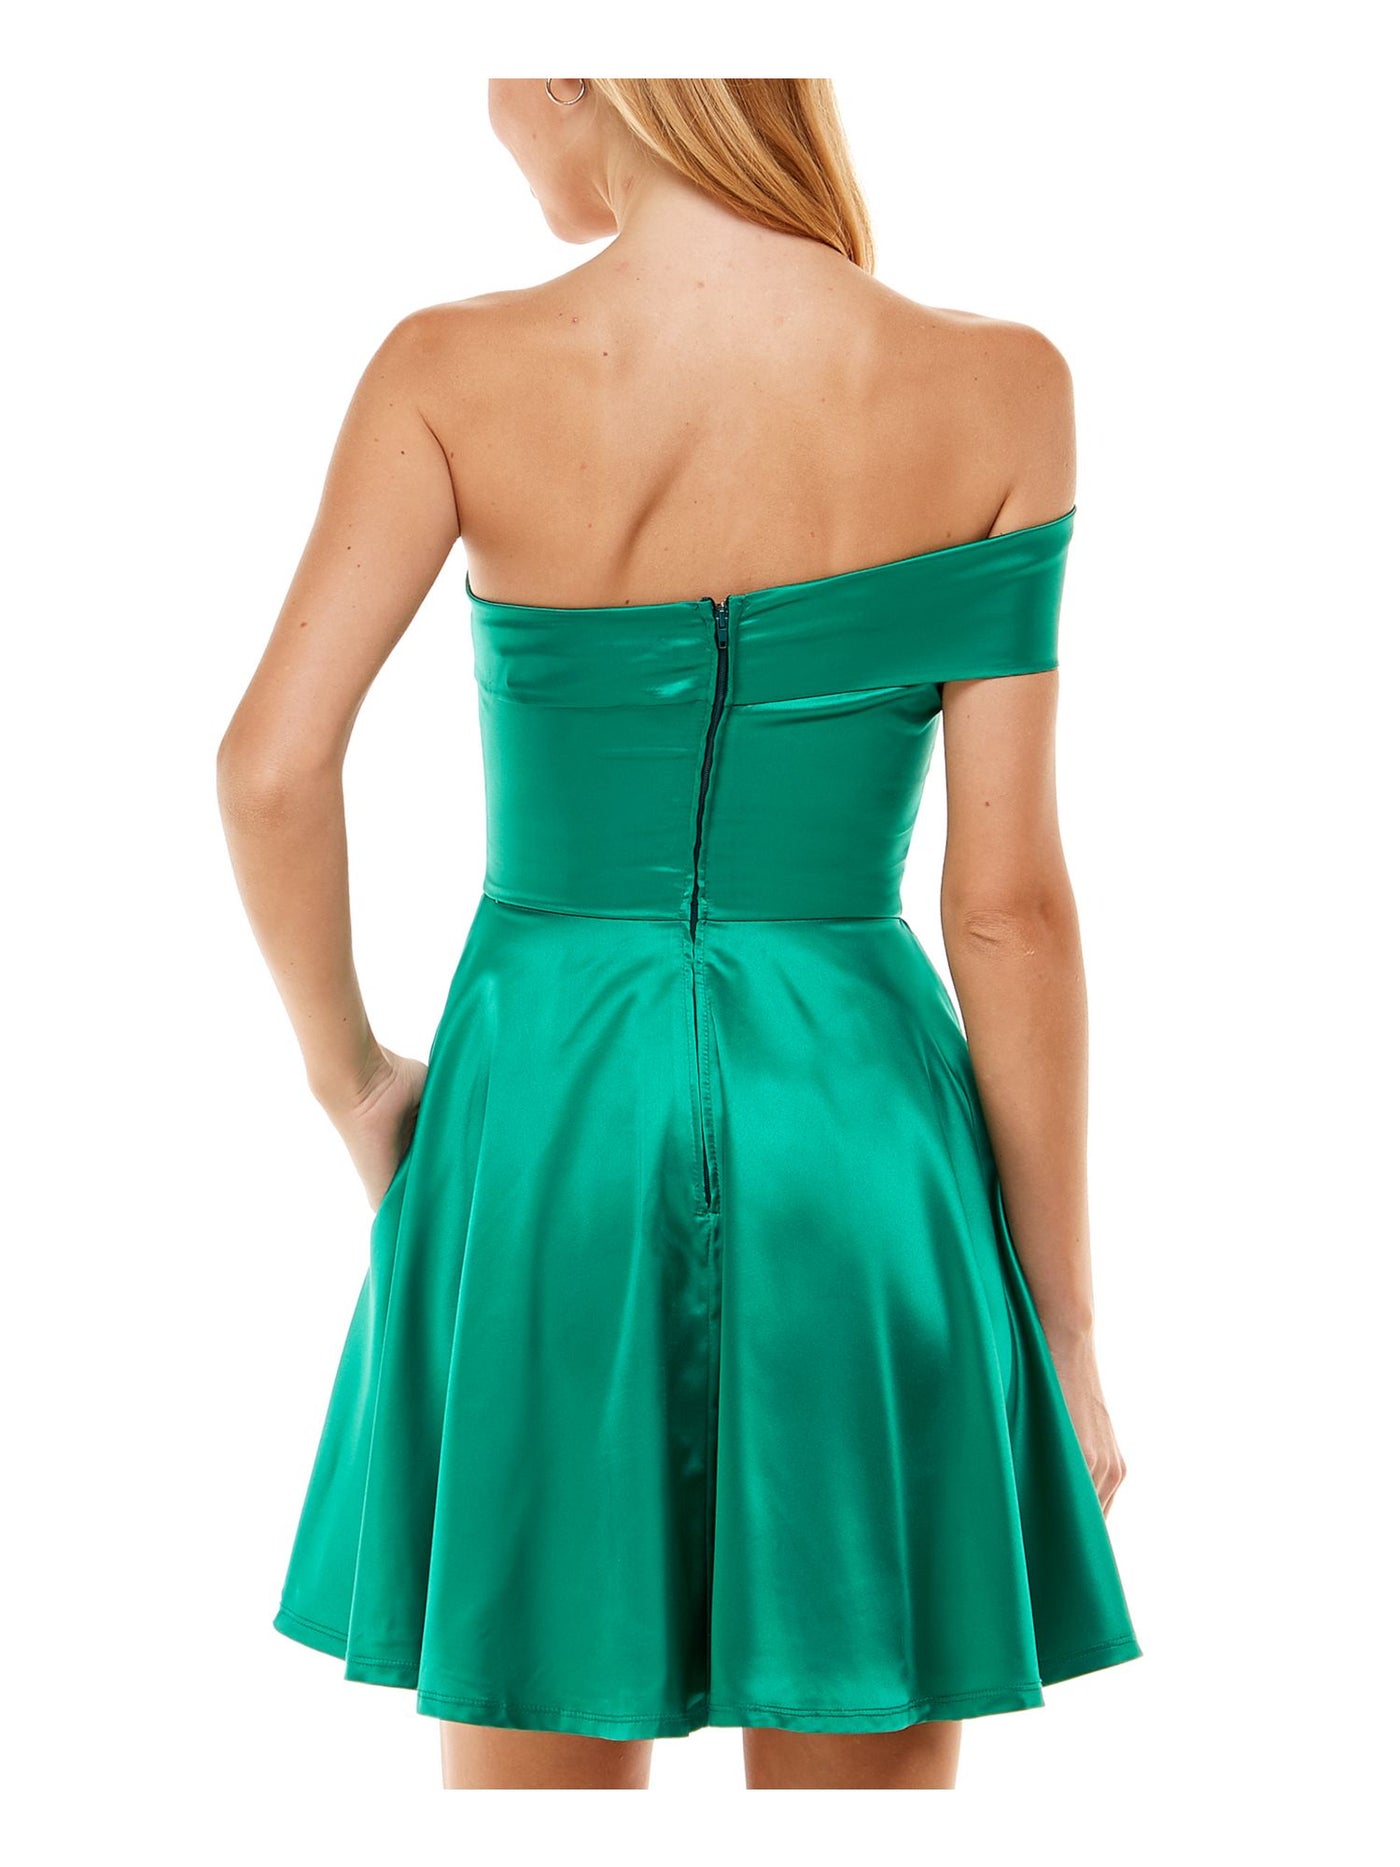 CITY STUDIO Womens Green Stretch Zippered Darted One Shoulder Sleeveless Off Shoulder Short Party Fit + Flare Dress Juniors 17